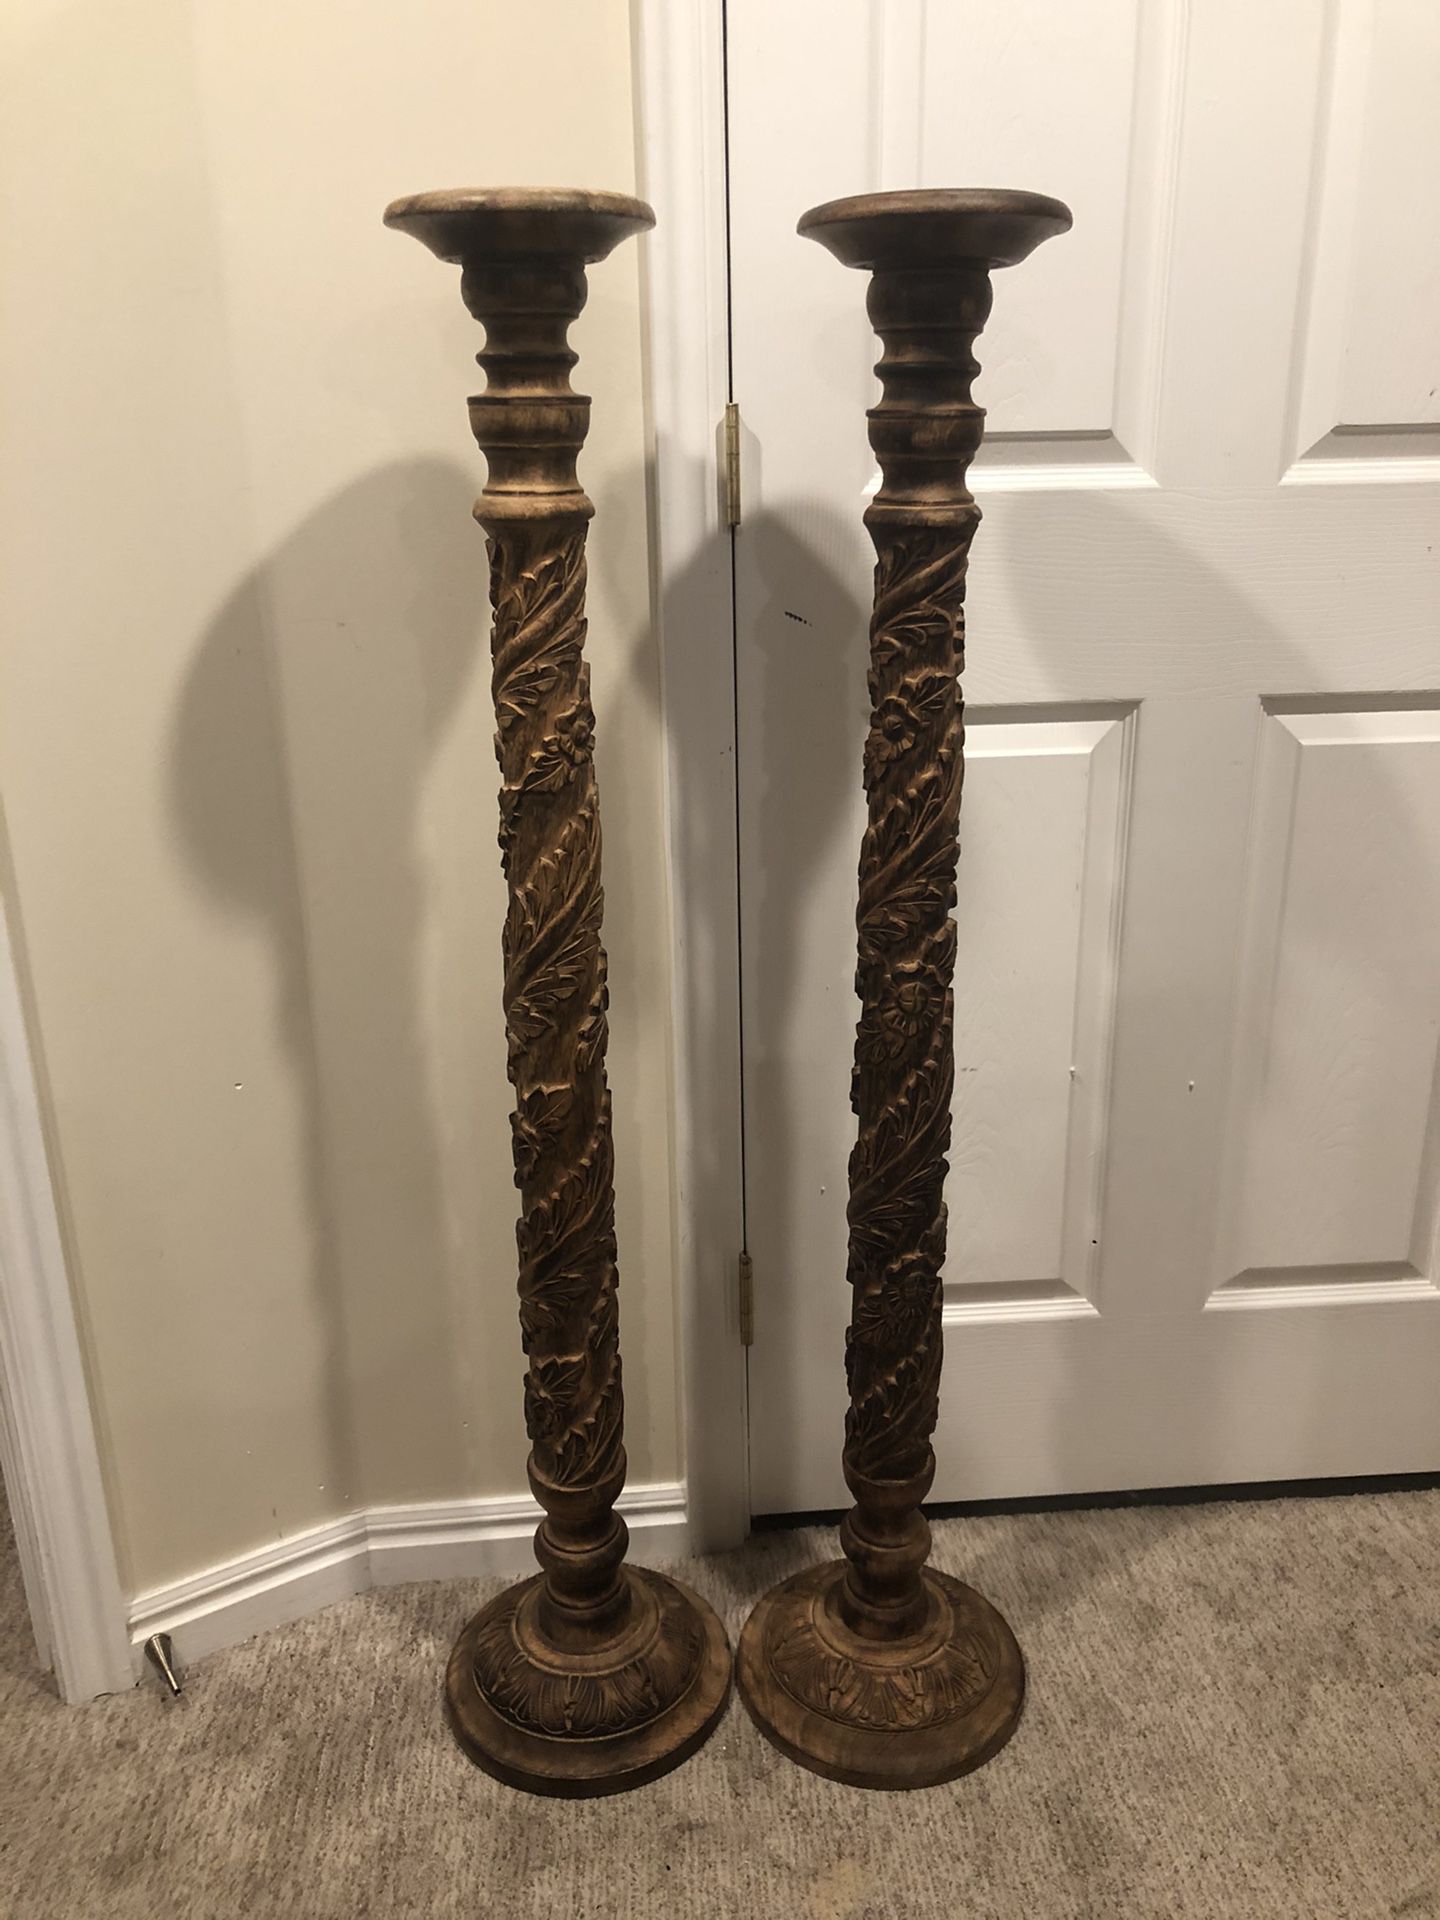 Breathtaking Hand Carved Teak Tall Pillar Candle Holders!